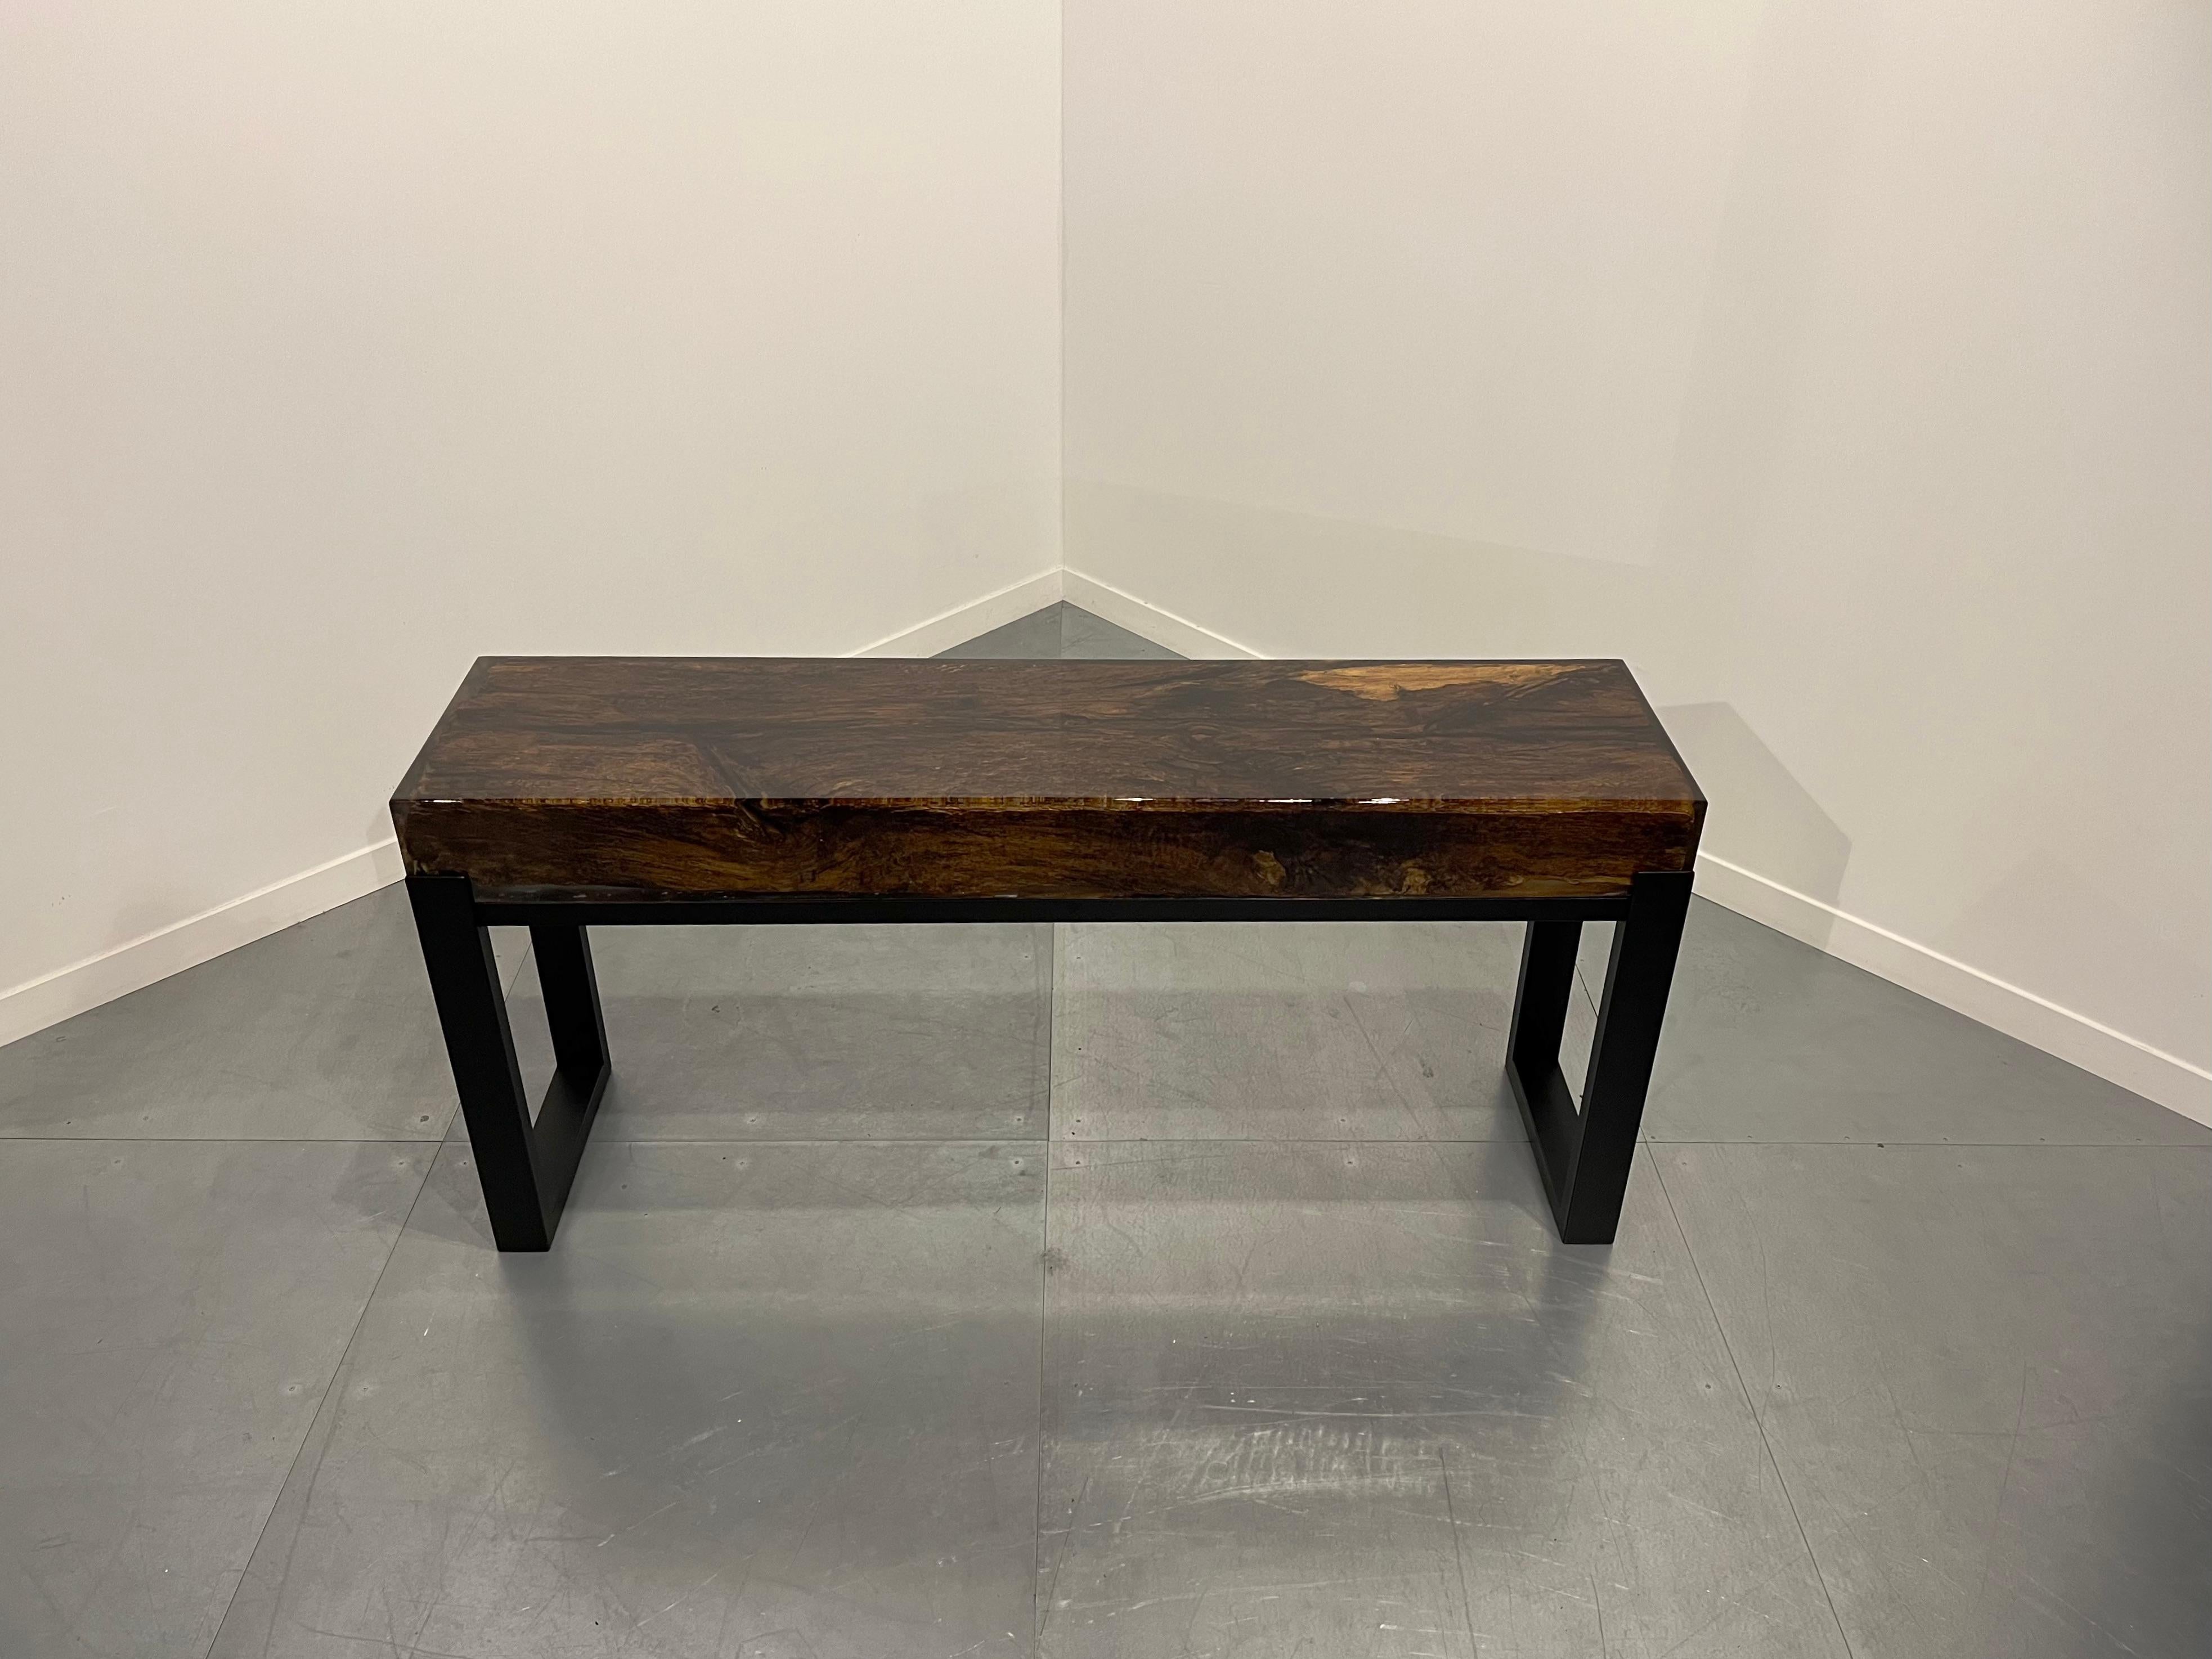 This Sidetable is made of an old oak wood beam which we coated in epoxy. The finish of the table is of the highest quality combined with the steel base.
This epoxy Sidetable is a definite eye catcher to your interior. And because of the age of the